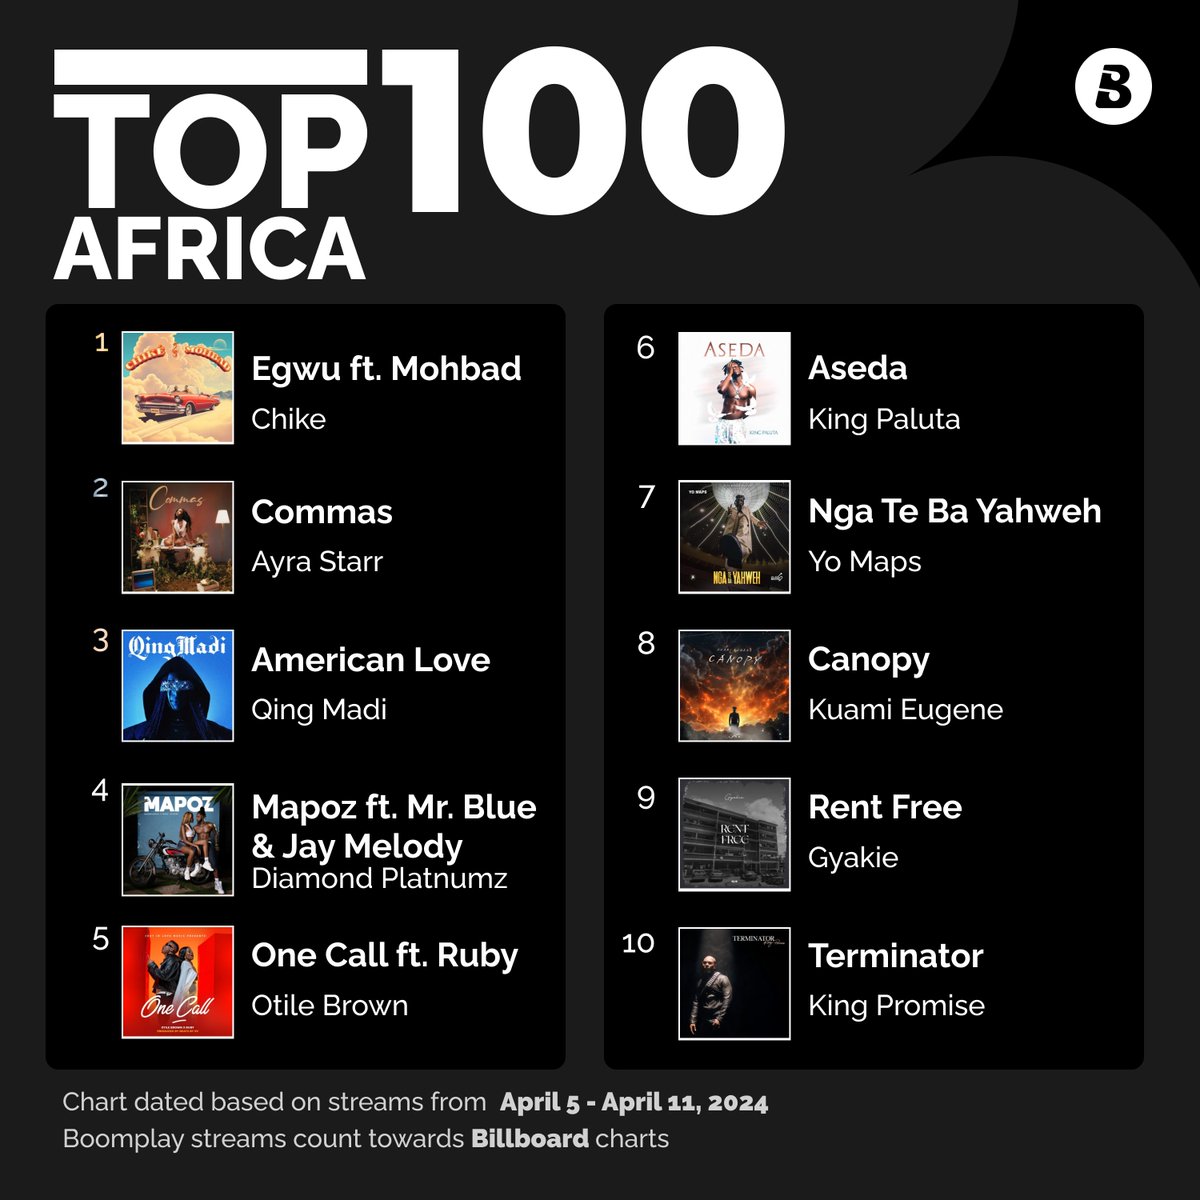 Welcome @KuamiEugene back to the #BoomplayAfricaTop100 Chart with his new single #Canopy !🔥#Egwu is still on top and #Aseda by @KingPalutaMusic is now at 6th position. 👊 Keep streaming your favourite tracks and make them to the top of the chart! #Boomplay #MusicChart